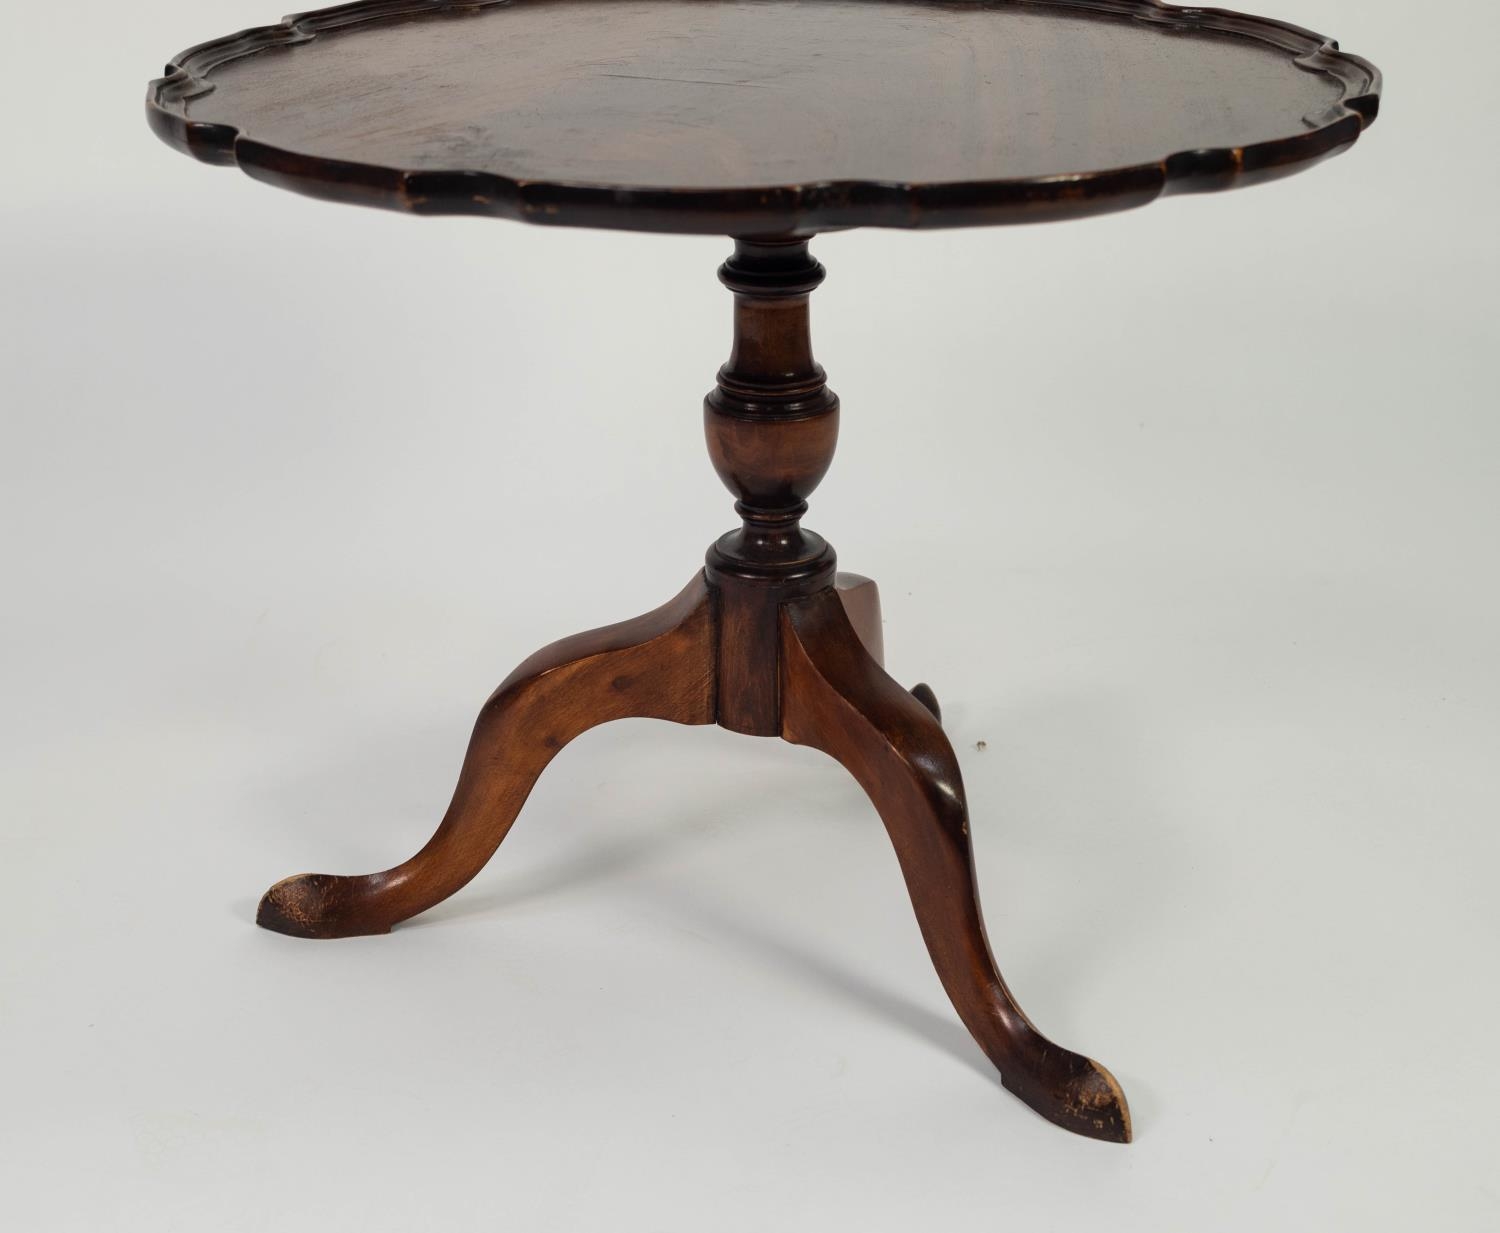 MODERN GEORGIAN STYLE FIGURE MAHOGANY SNAP TOP LOW OCCASIONAL TABLE, the flame cut top with - Image 2 of 3